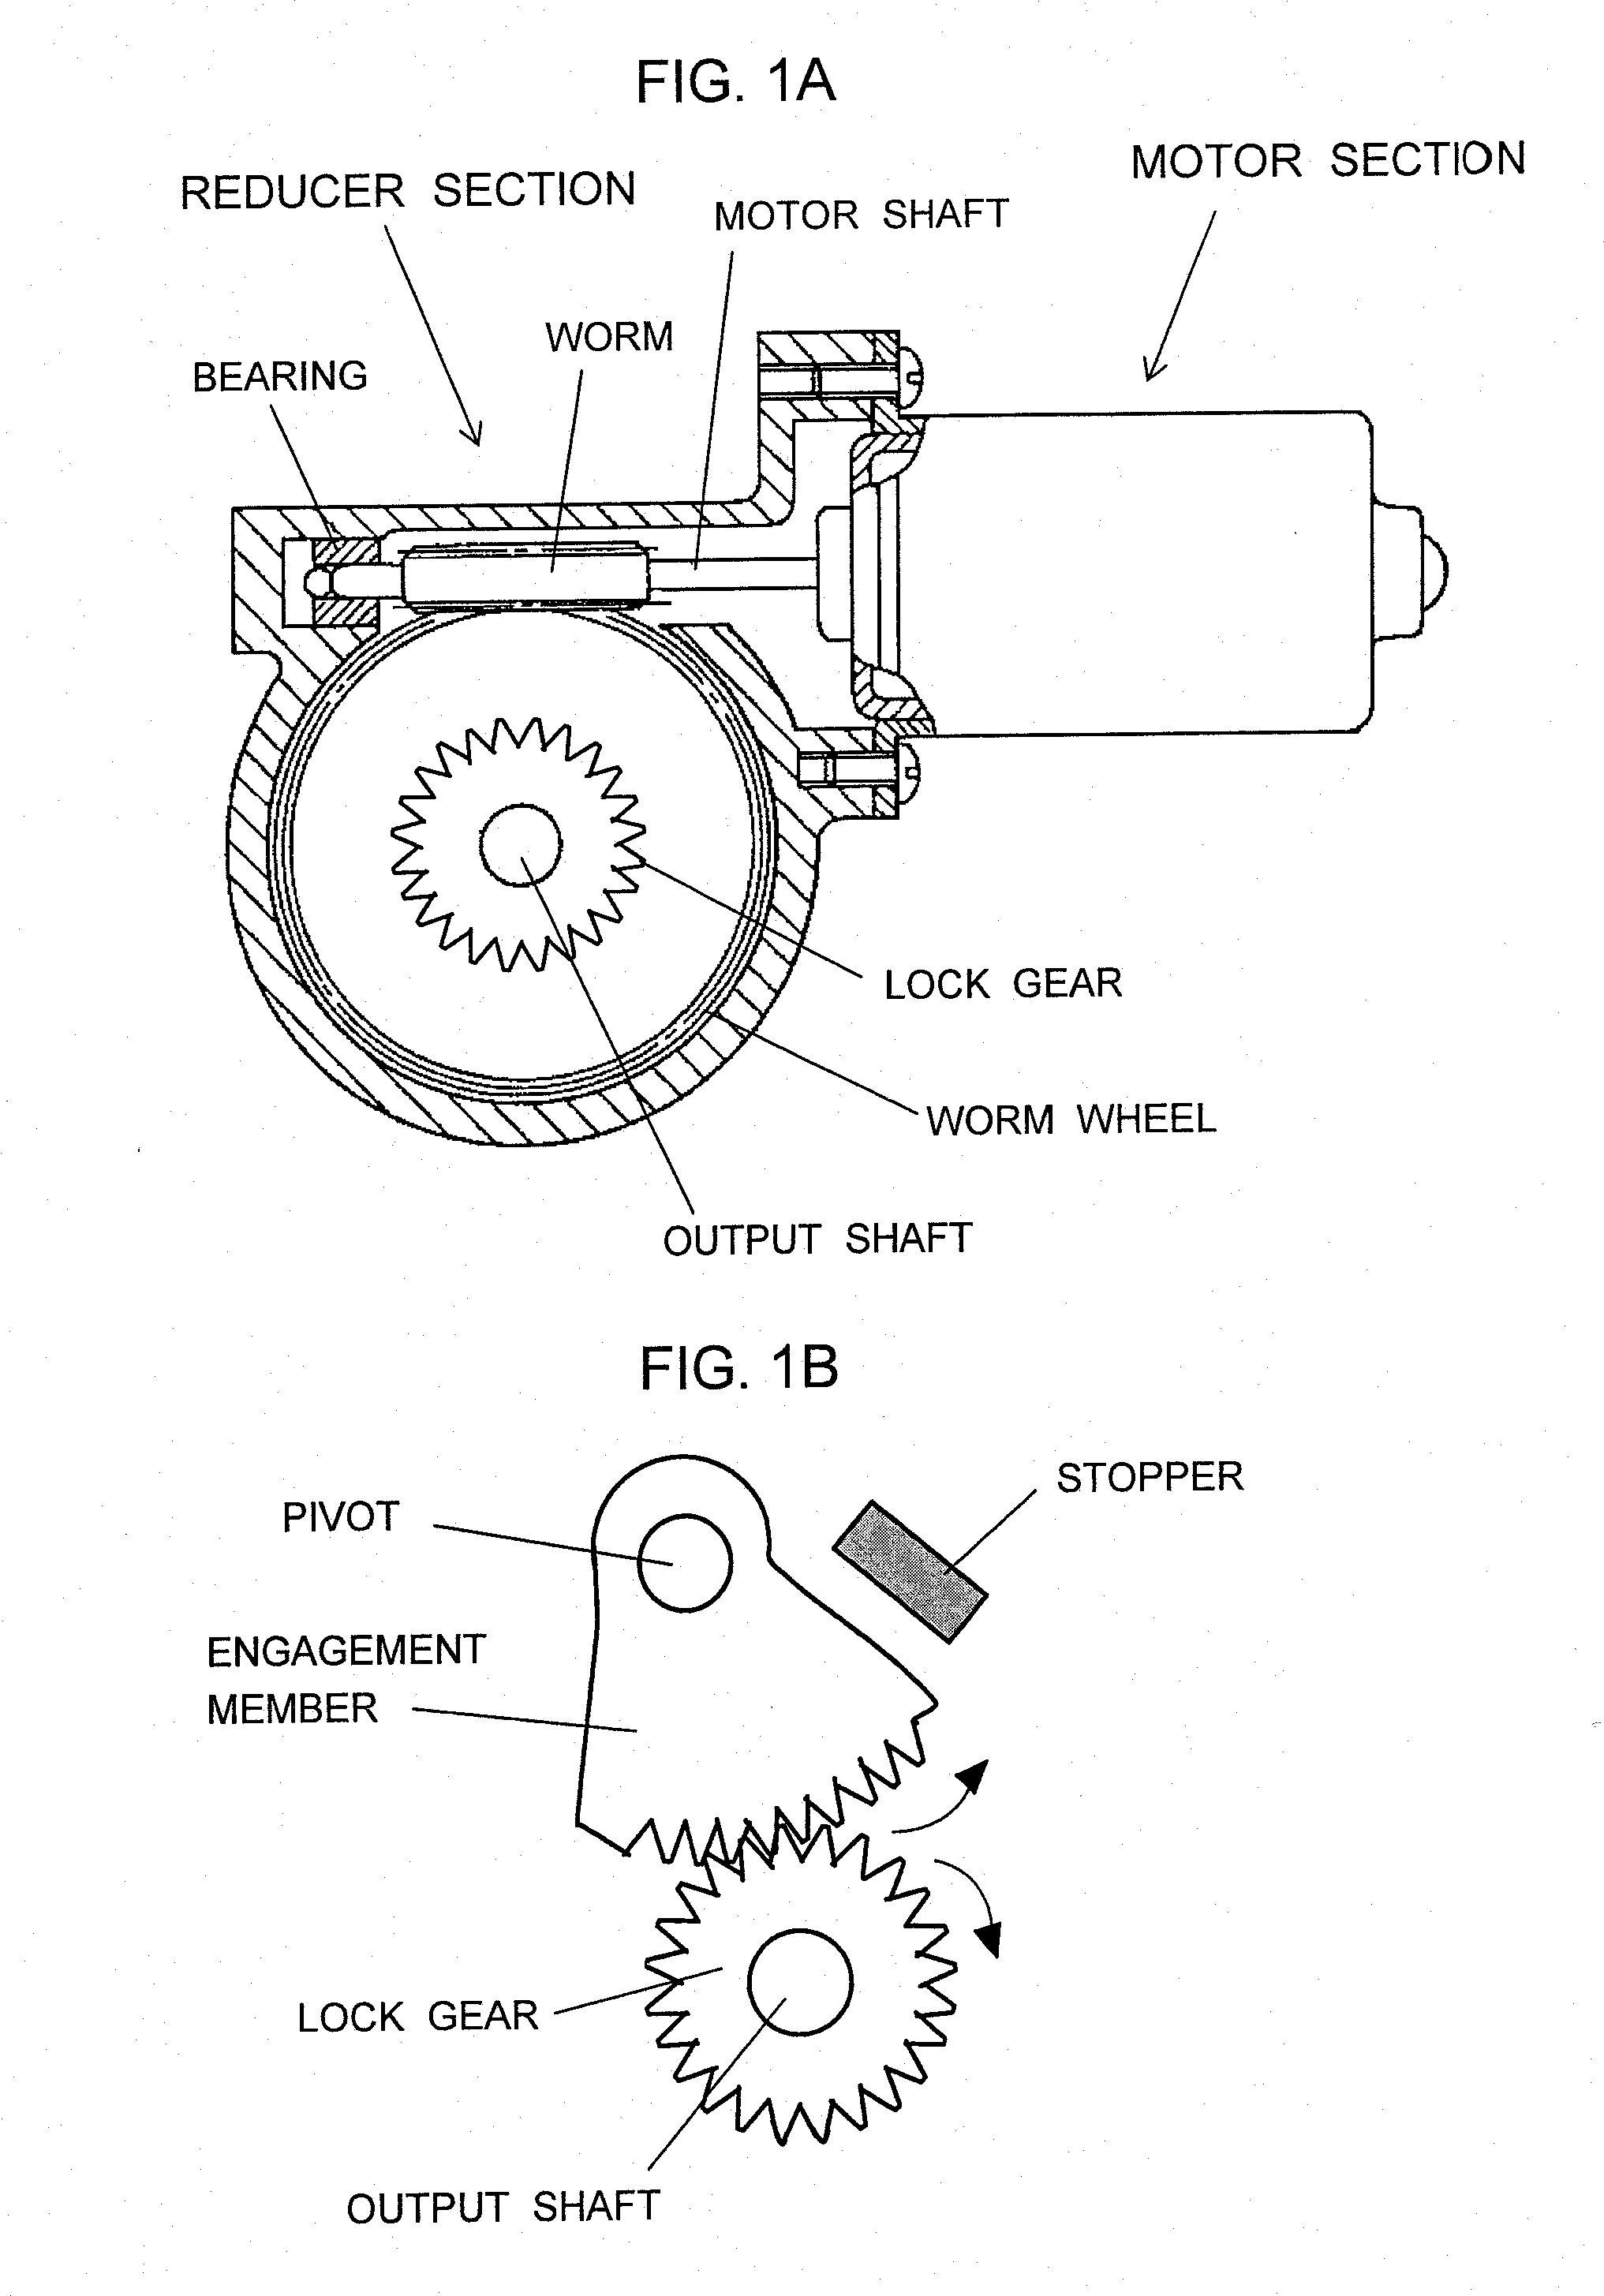 Small-sized motor